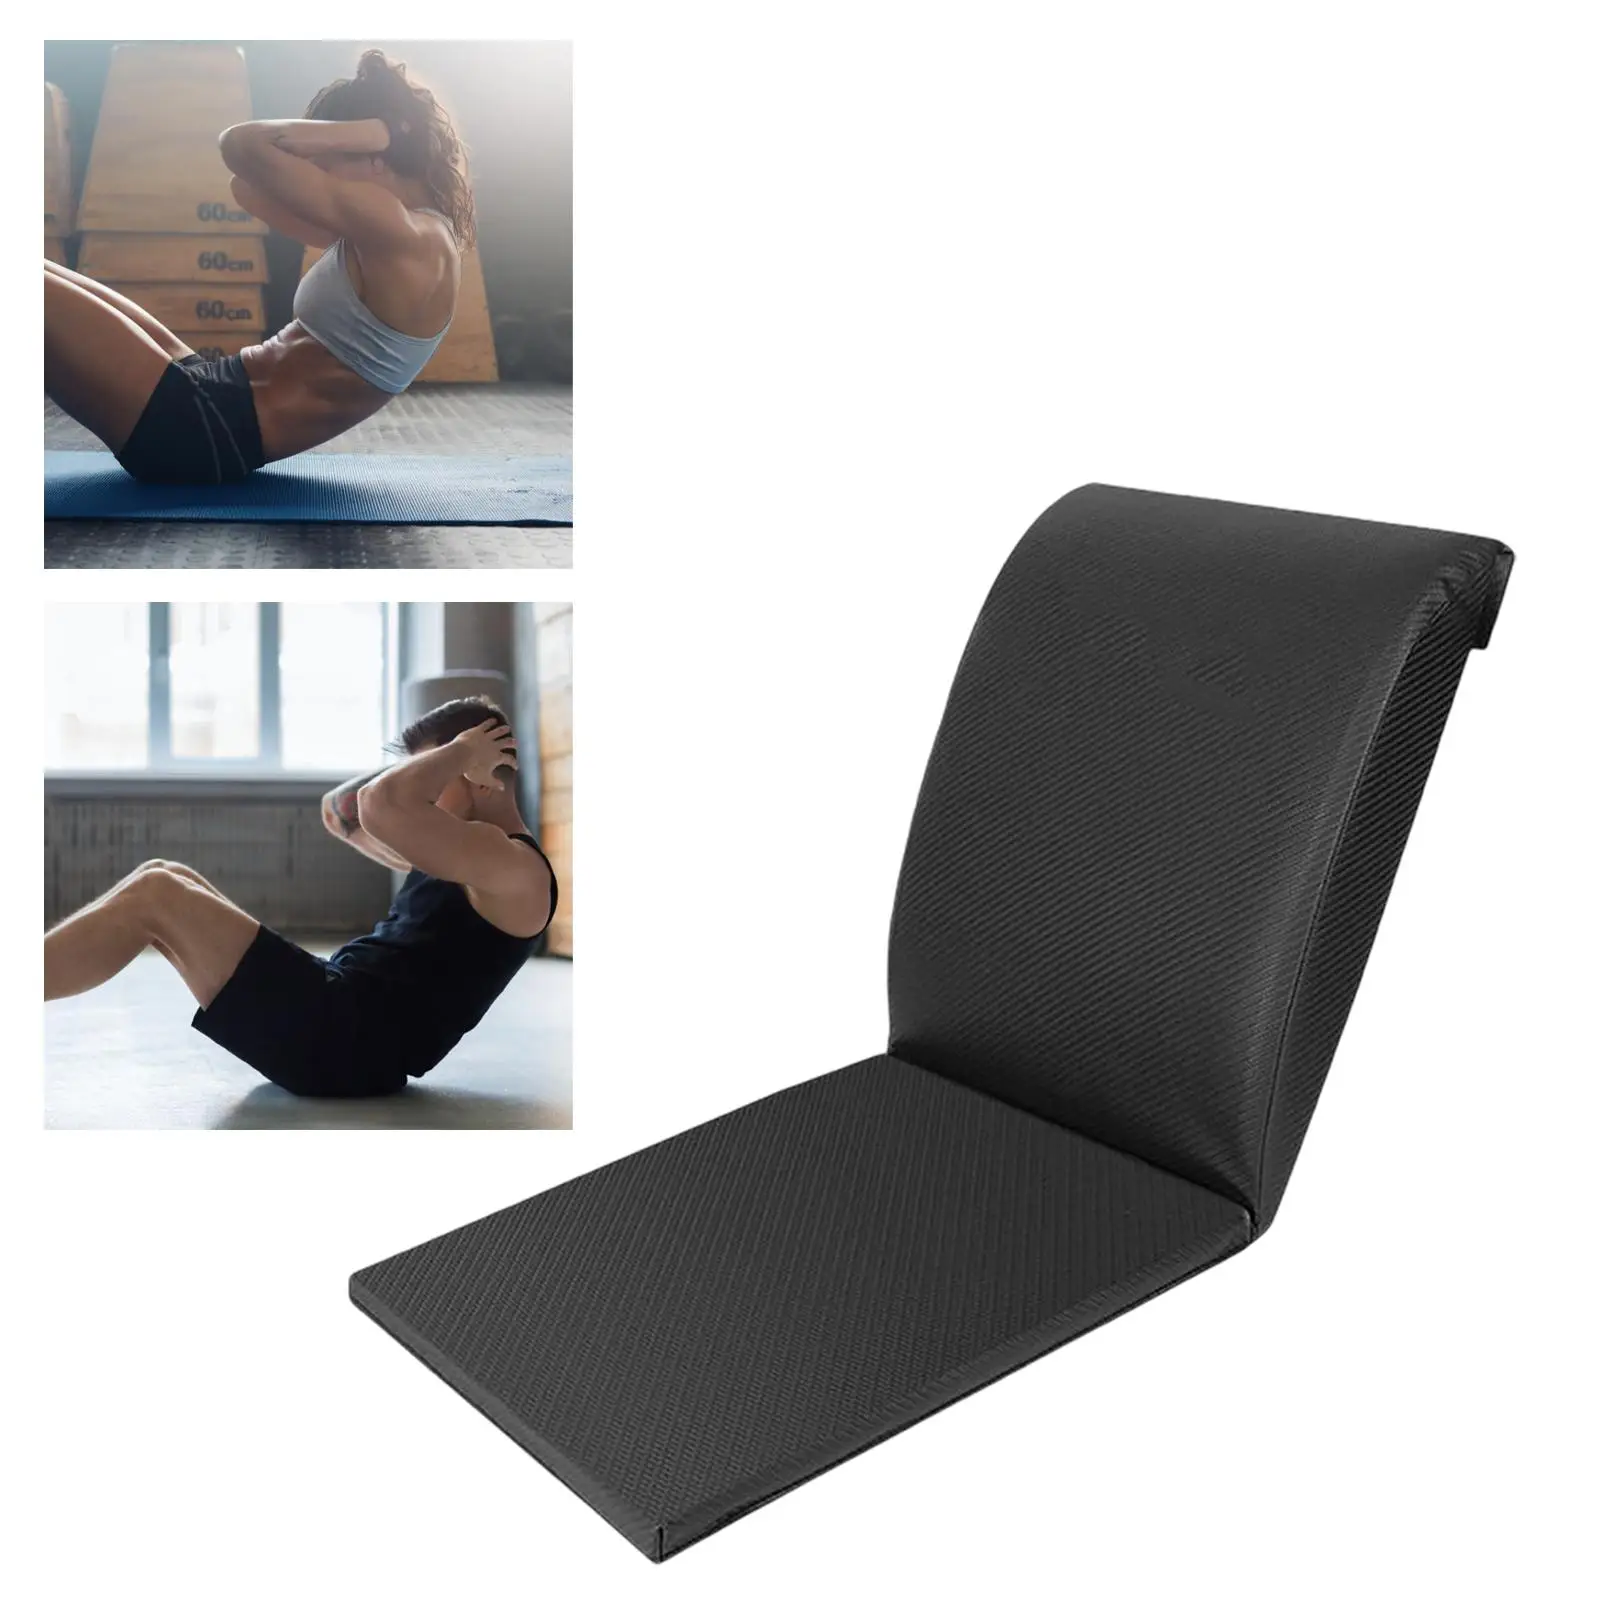 Fitness Ab Pad W/ Tailbone Protector Portable Foam Thick Sit up Core Training Pad Foldable Sit up Mat for Fitness Workouts Home